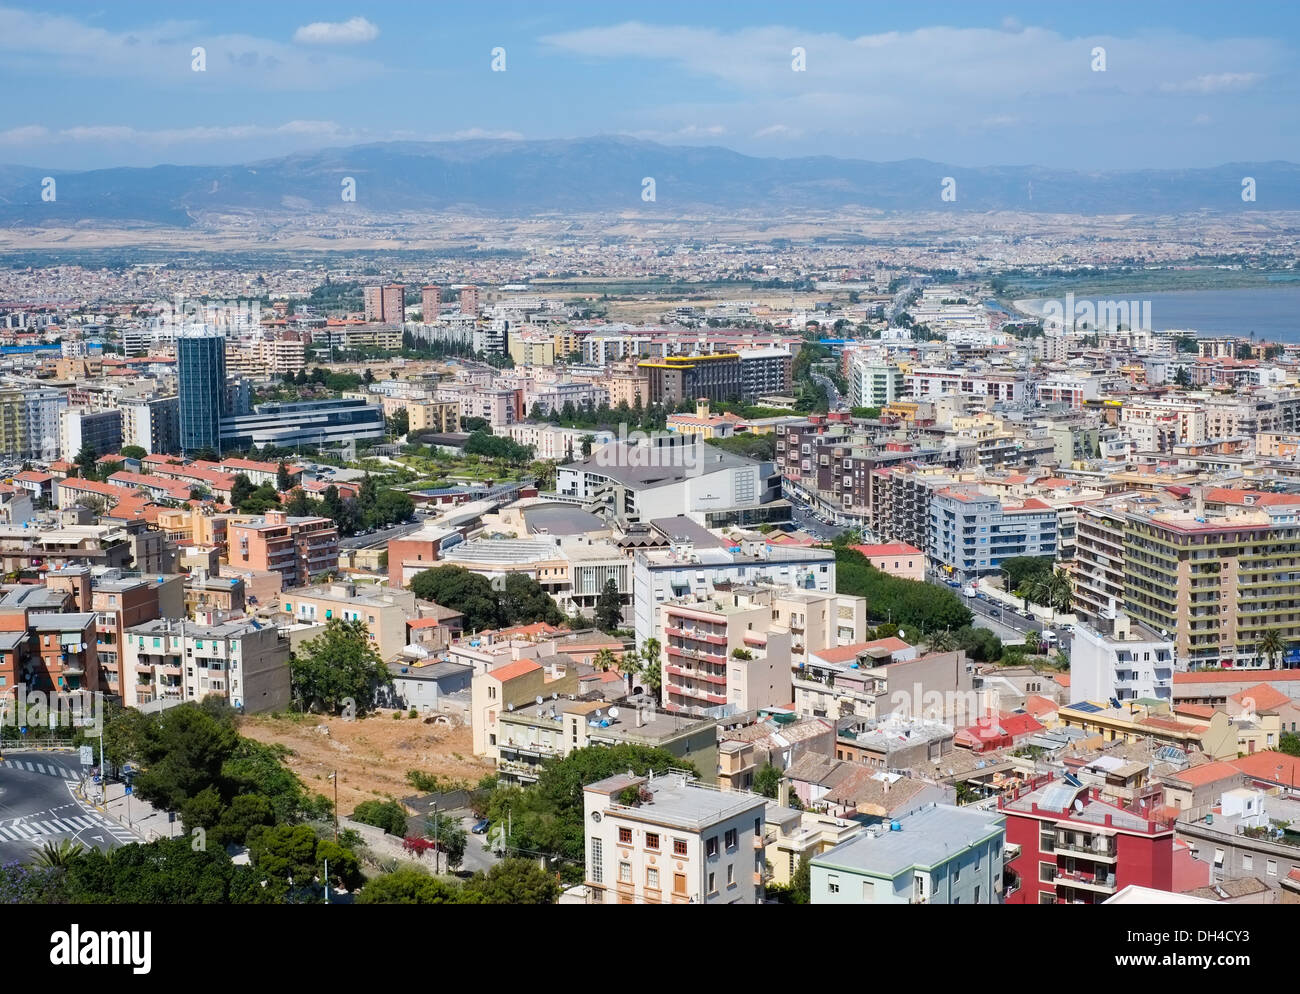 View of Cagliari from above, Sardinia, Italy Stock Photo